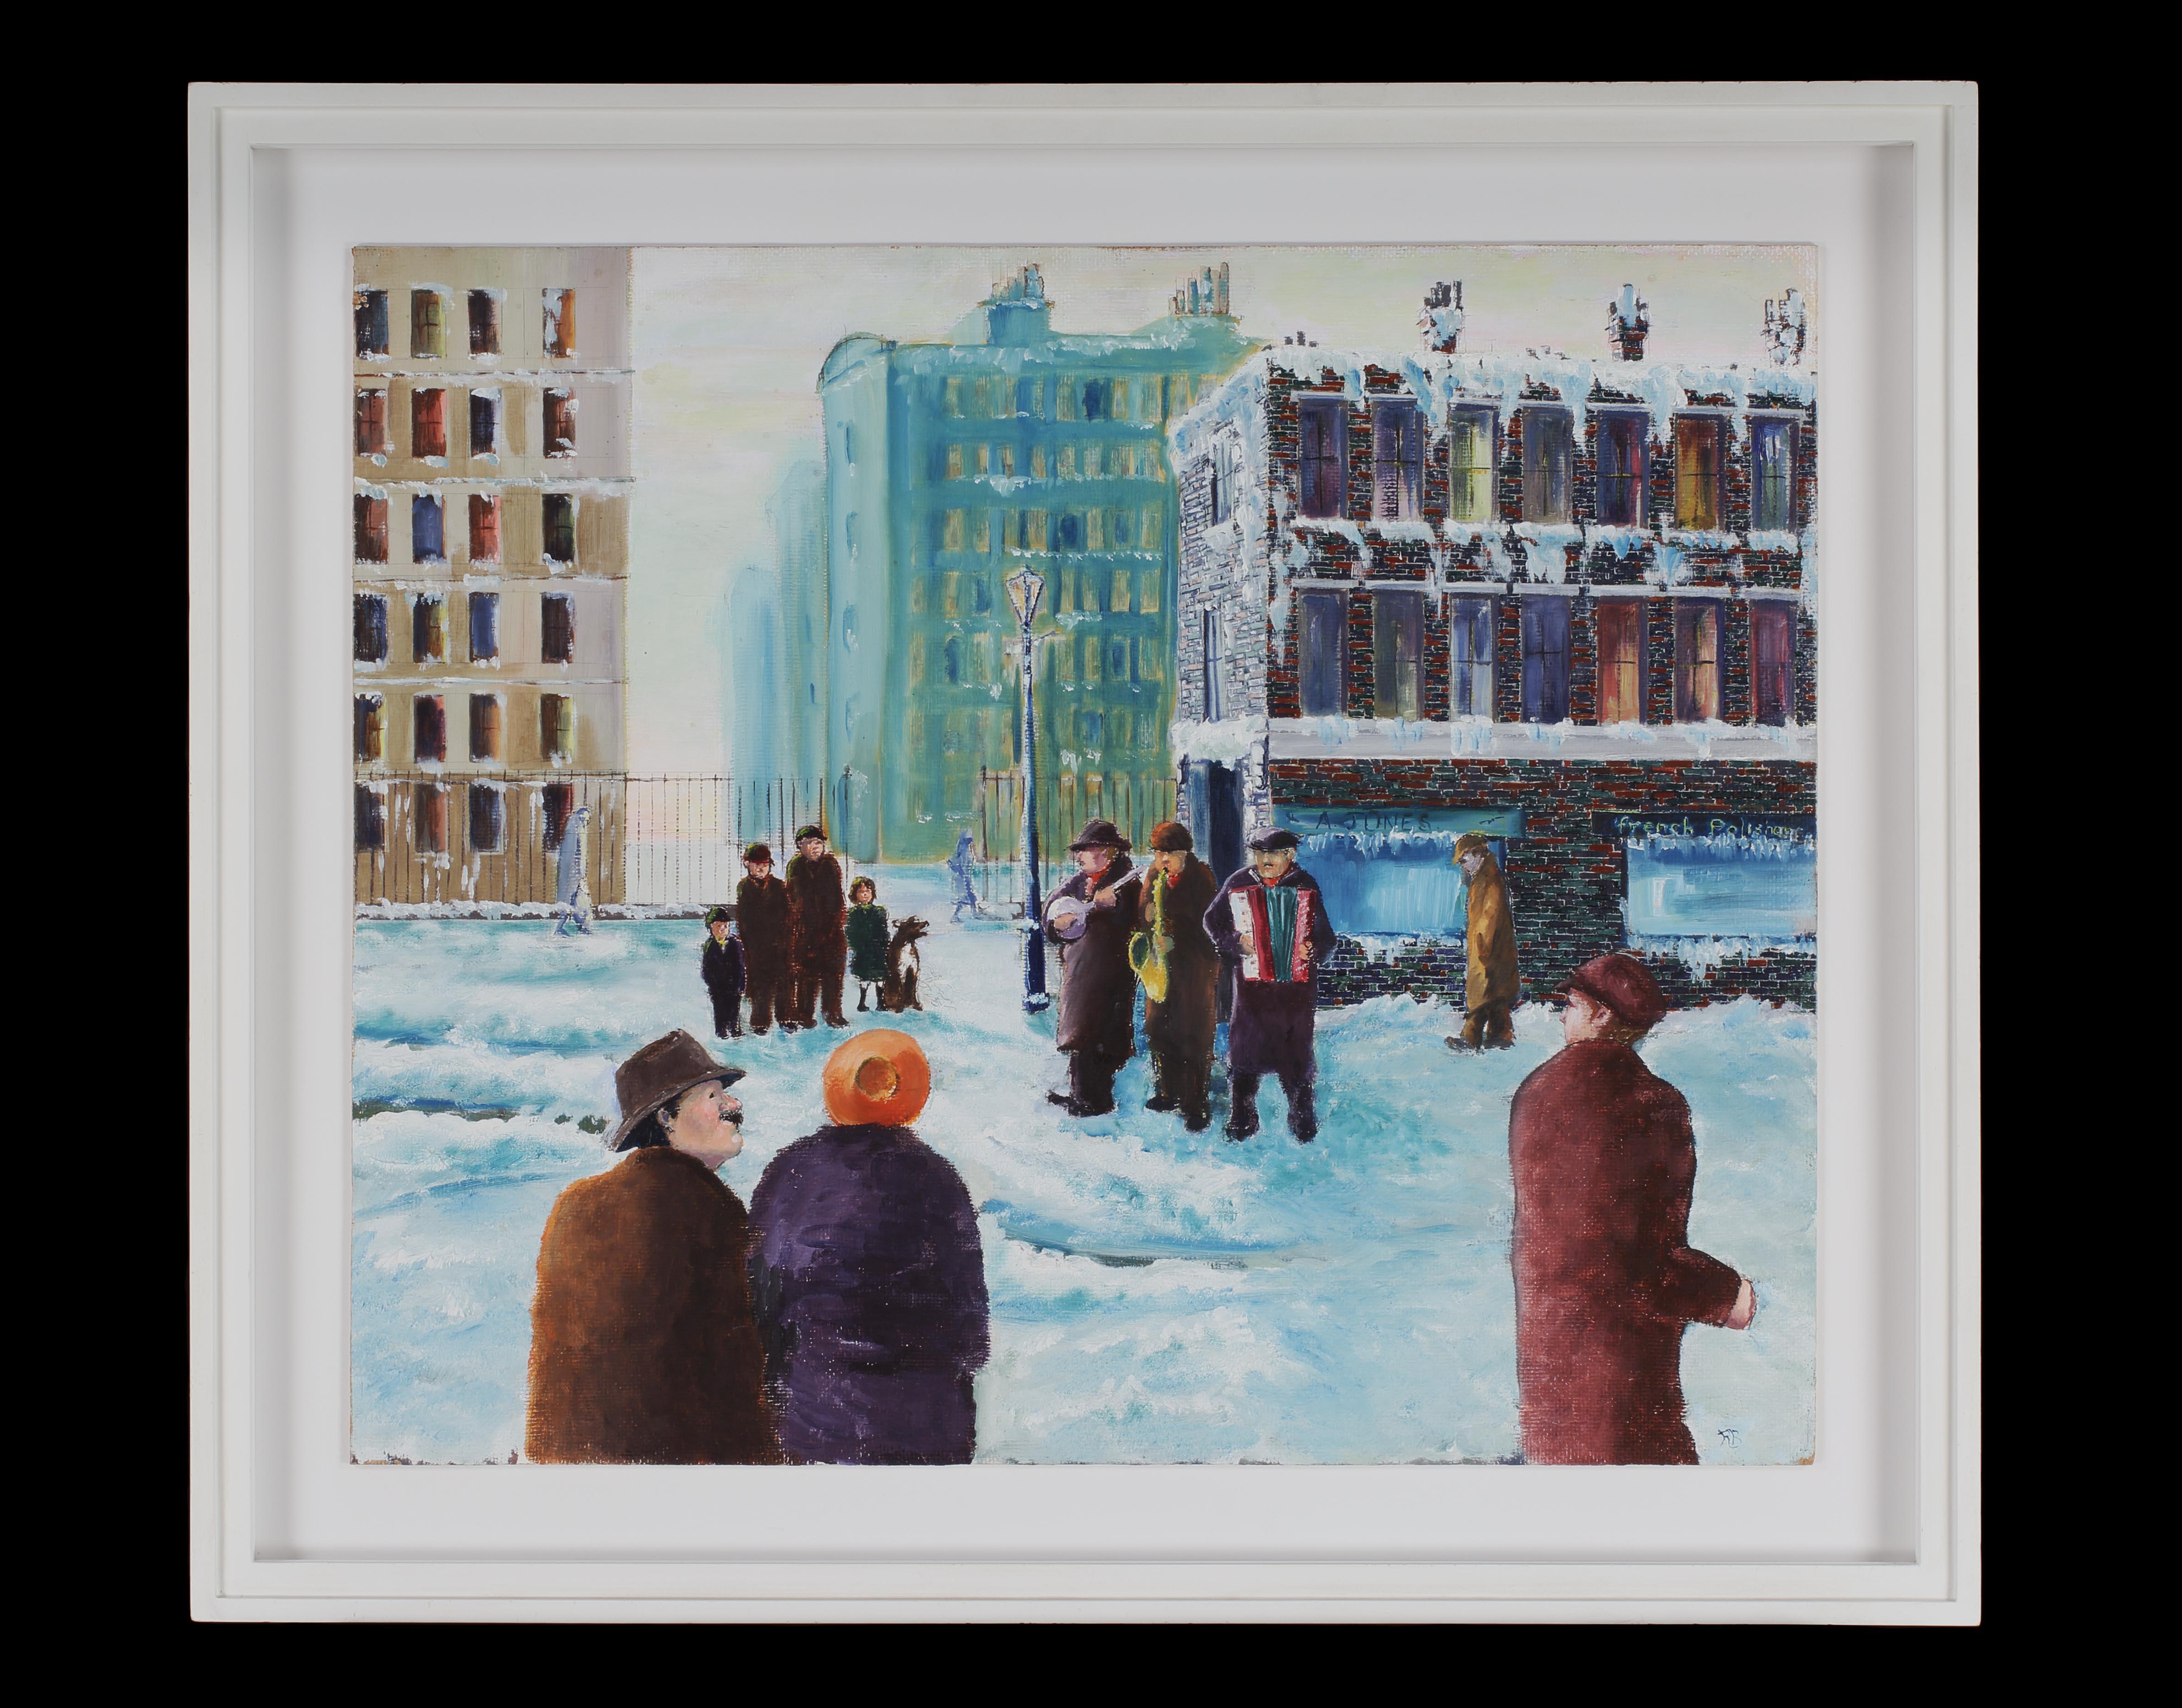 Ron Barnes : The buskers, New York, acrylic on board, RB monogram lower right, circa 1930

Evokes the atmosphere of the period and the spontaneity and aliveness of the moment
Engaging composition with a vibrant quality drawing the viewer into the